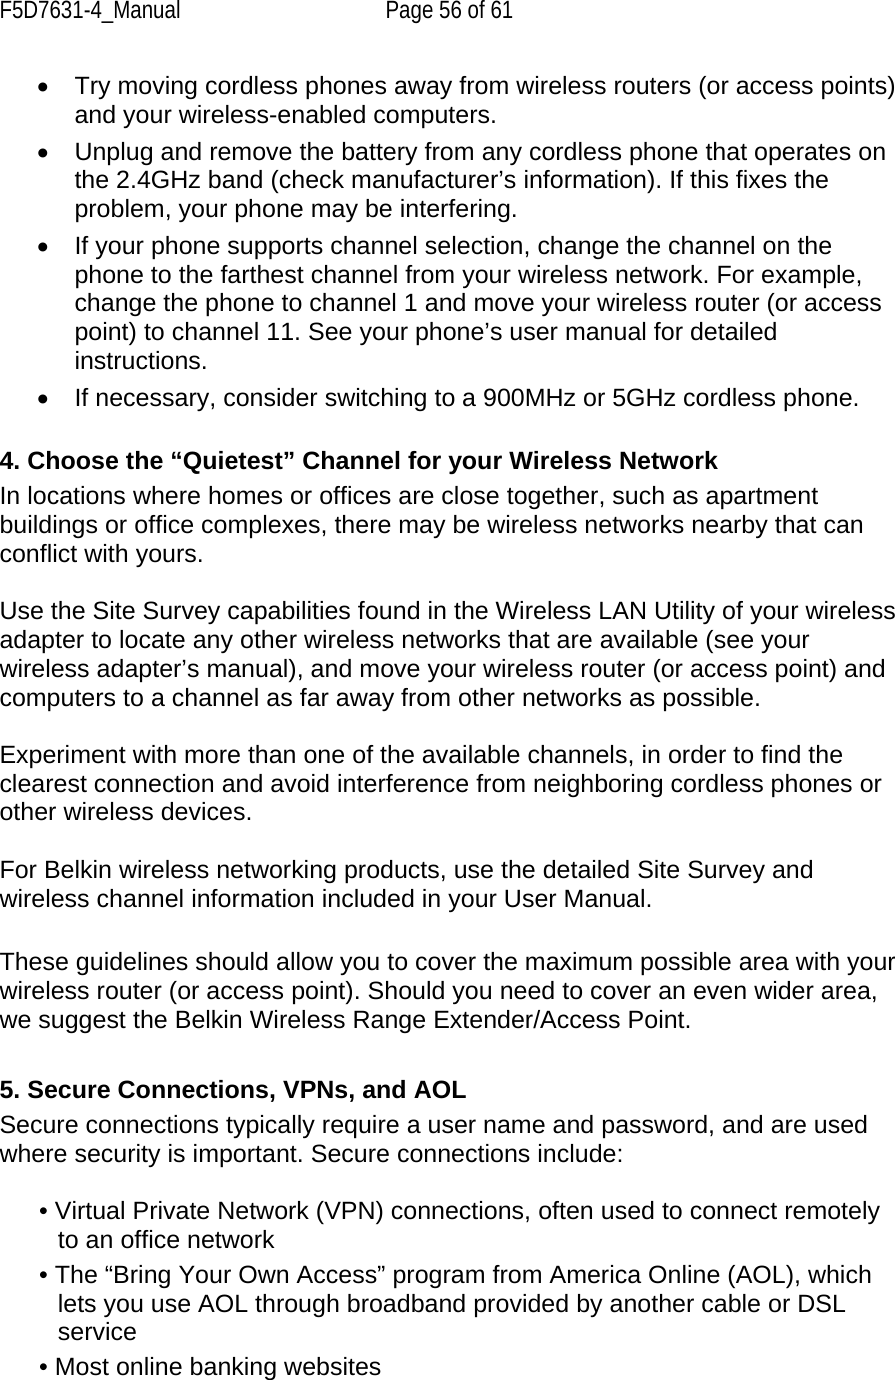 F5D7631-4_Manual  Page 56 of 61 •  Try moving cordless phones away from wireless routers (or access points) and your wireless-enabled computers.  •  Unplug and remove the battery from any cordless phone that operates on the 2.4GHz band (check manufacturer’s information). If this fixes the problem, your phone may be interfering.  •  If your phone supports channel selection, change the channel on the phone to the farthest channel from your wireless network. For example, change the phone to channel 1 and move your wireless router (or access point) to channel 11. See your phone’s user manual for detailed instructions.  •  If necessary, consider switching to a 900MHz or 5GHz cordless phone.  4. Choose the “Quietest” Channel for your Wireless Network  In locations where homes or offices are close together, such as apartment buildings or office complexes, there may be wireless networks nearby that can conflict with yours.   Use the Site Survey capabilities found in the Wireless LAN Utility of your wireless adapter to locate any other wireless networks that are available (see your wireless adapter’s manual), and move your wireless router (or access point) and computers to a channel as far away from other networks as possible.  Experiment with more than one of the available channels, in order to find the clearest connection and avoid interference from neighboring cordless phones or other wireless devices.   For Belkin wireless networking products, use the detailed Site Survey and wireless channel information included in your User Manual.   These guidelines should allow you to cover the maximum possible area with your wireless router (or access point). Should you need to cover an even wider area, we suggest the Belkin Wireless Range Extender/Access Point.  5. Secure Connections, VPNs, and AOL  Secure connections typically require a user name and password, and are used where security is important. Secure connections include:  • Virtual Private Network (VPN) connections, often used to connect remotely to an office network • The “Bring Your Own Access” program from America Online (AOL), which lets you use AOL through broadband provided by another cable or DSL service • Most online banking websites 